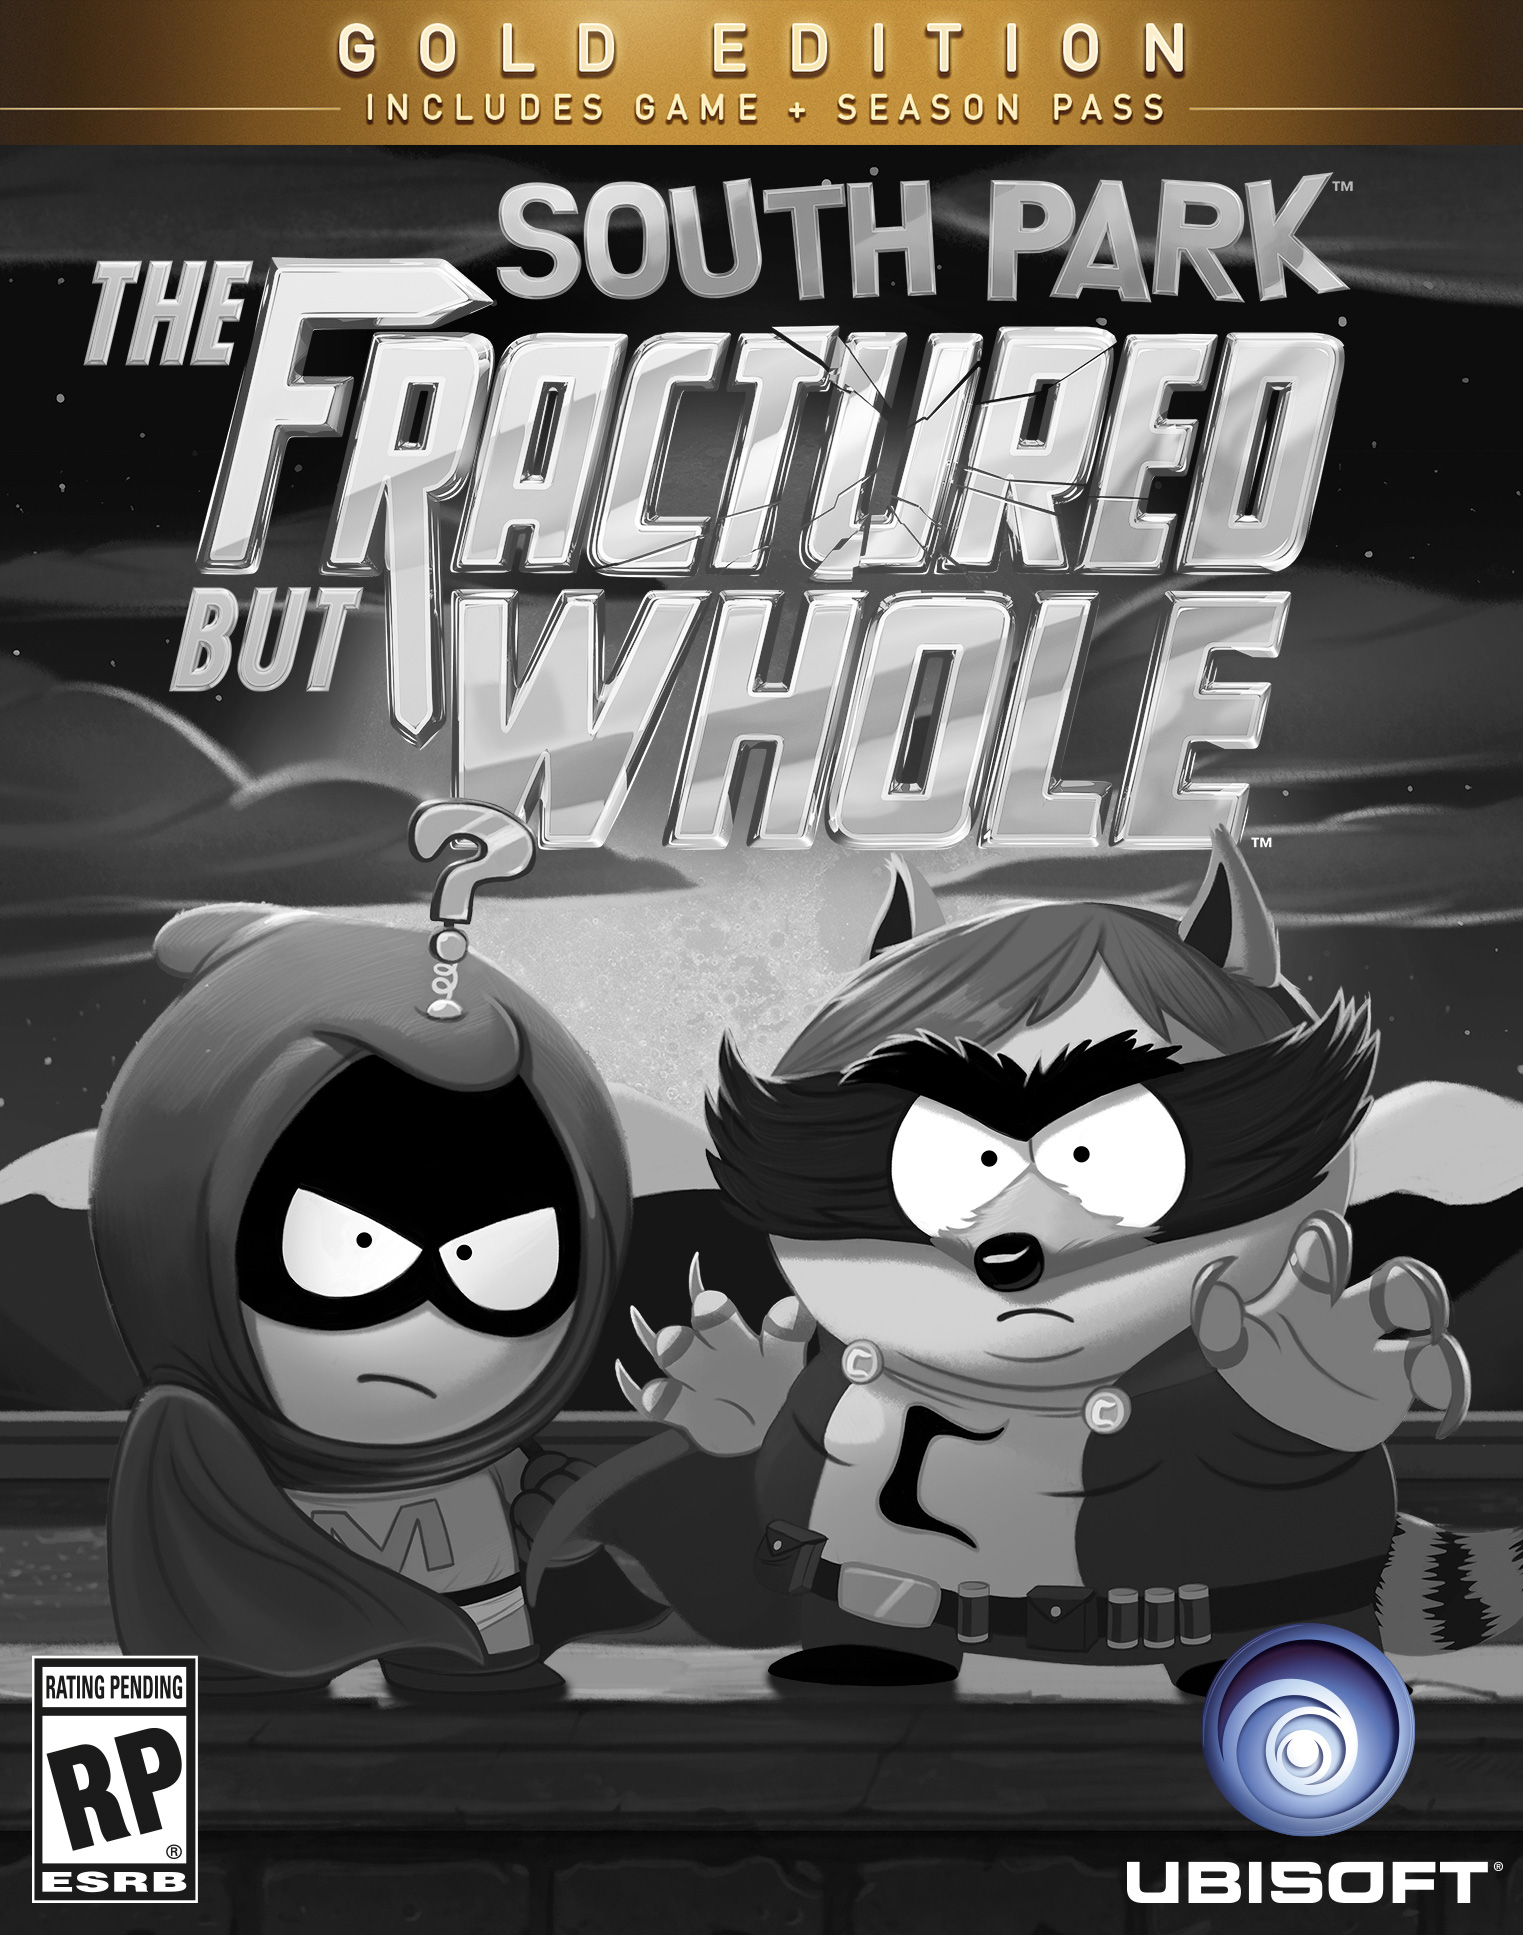 South park the fractured but whole купить ключ steam фото 13